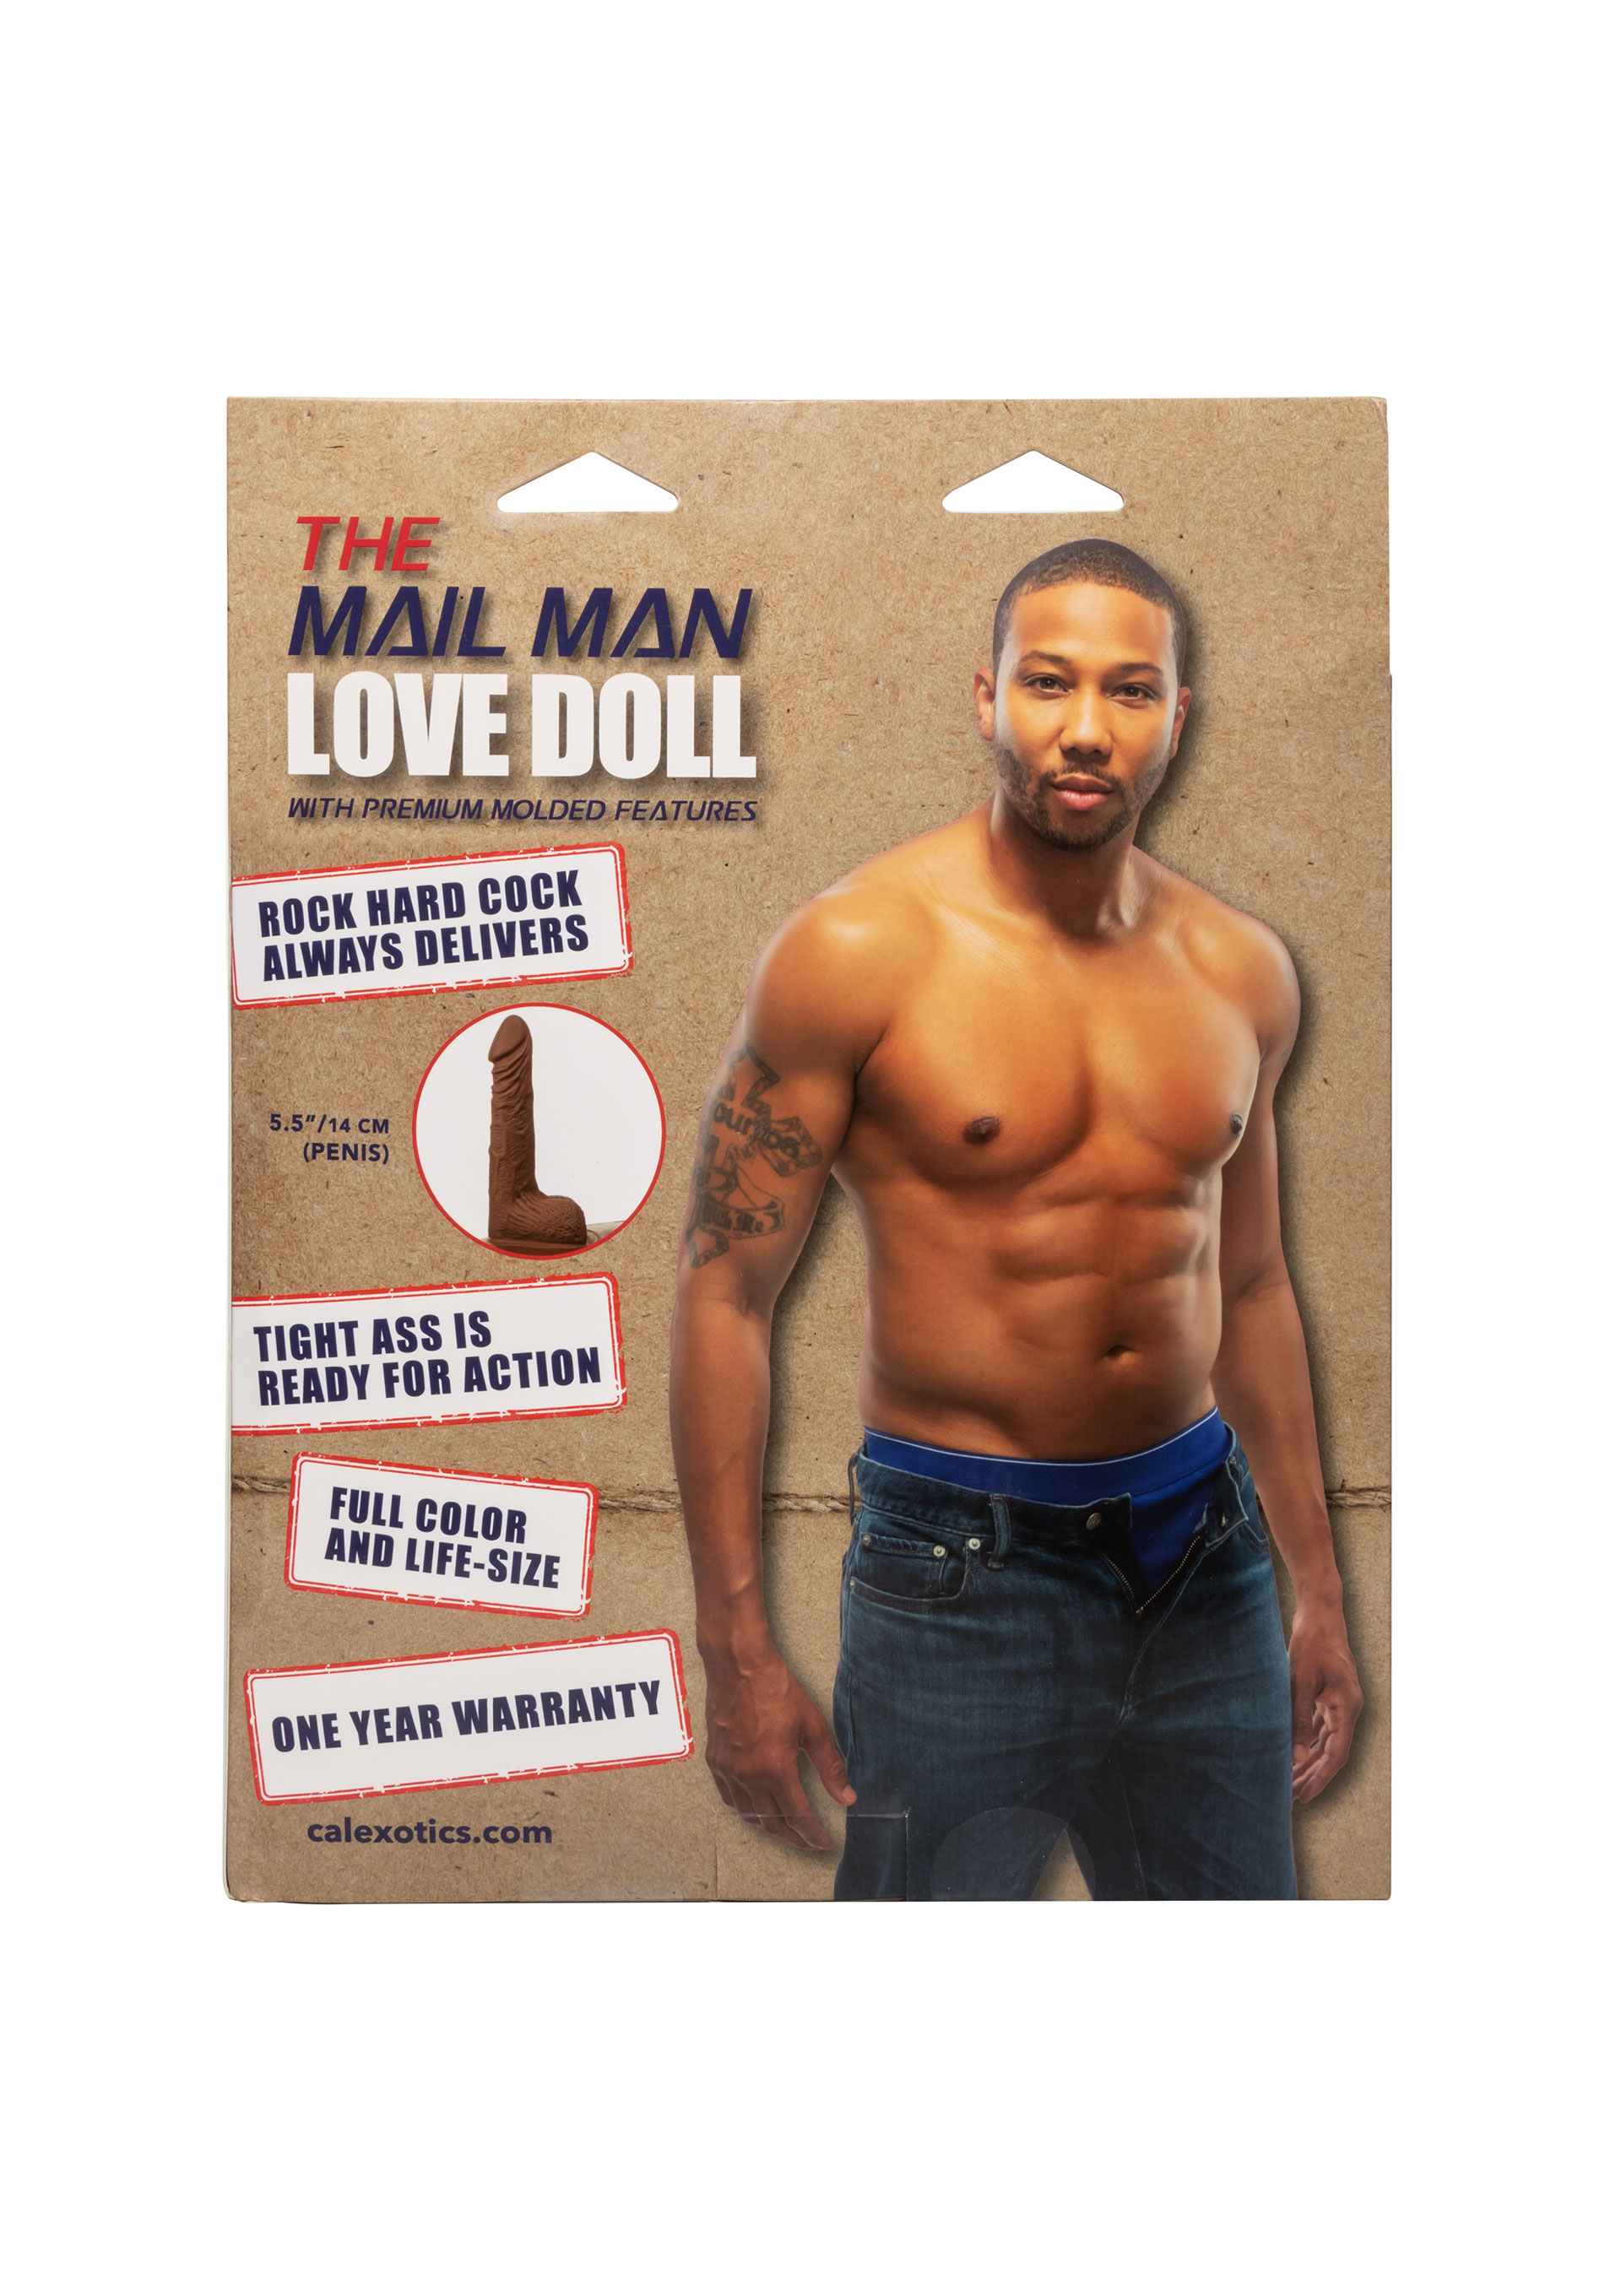 The Mail Man Love Doll.